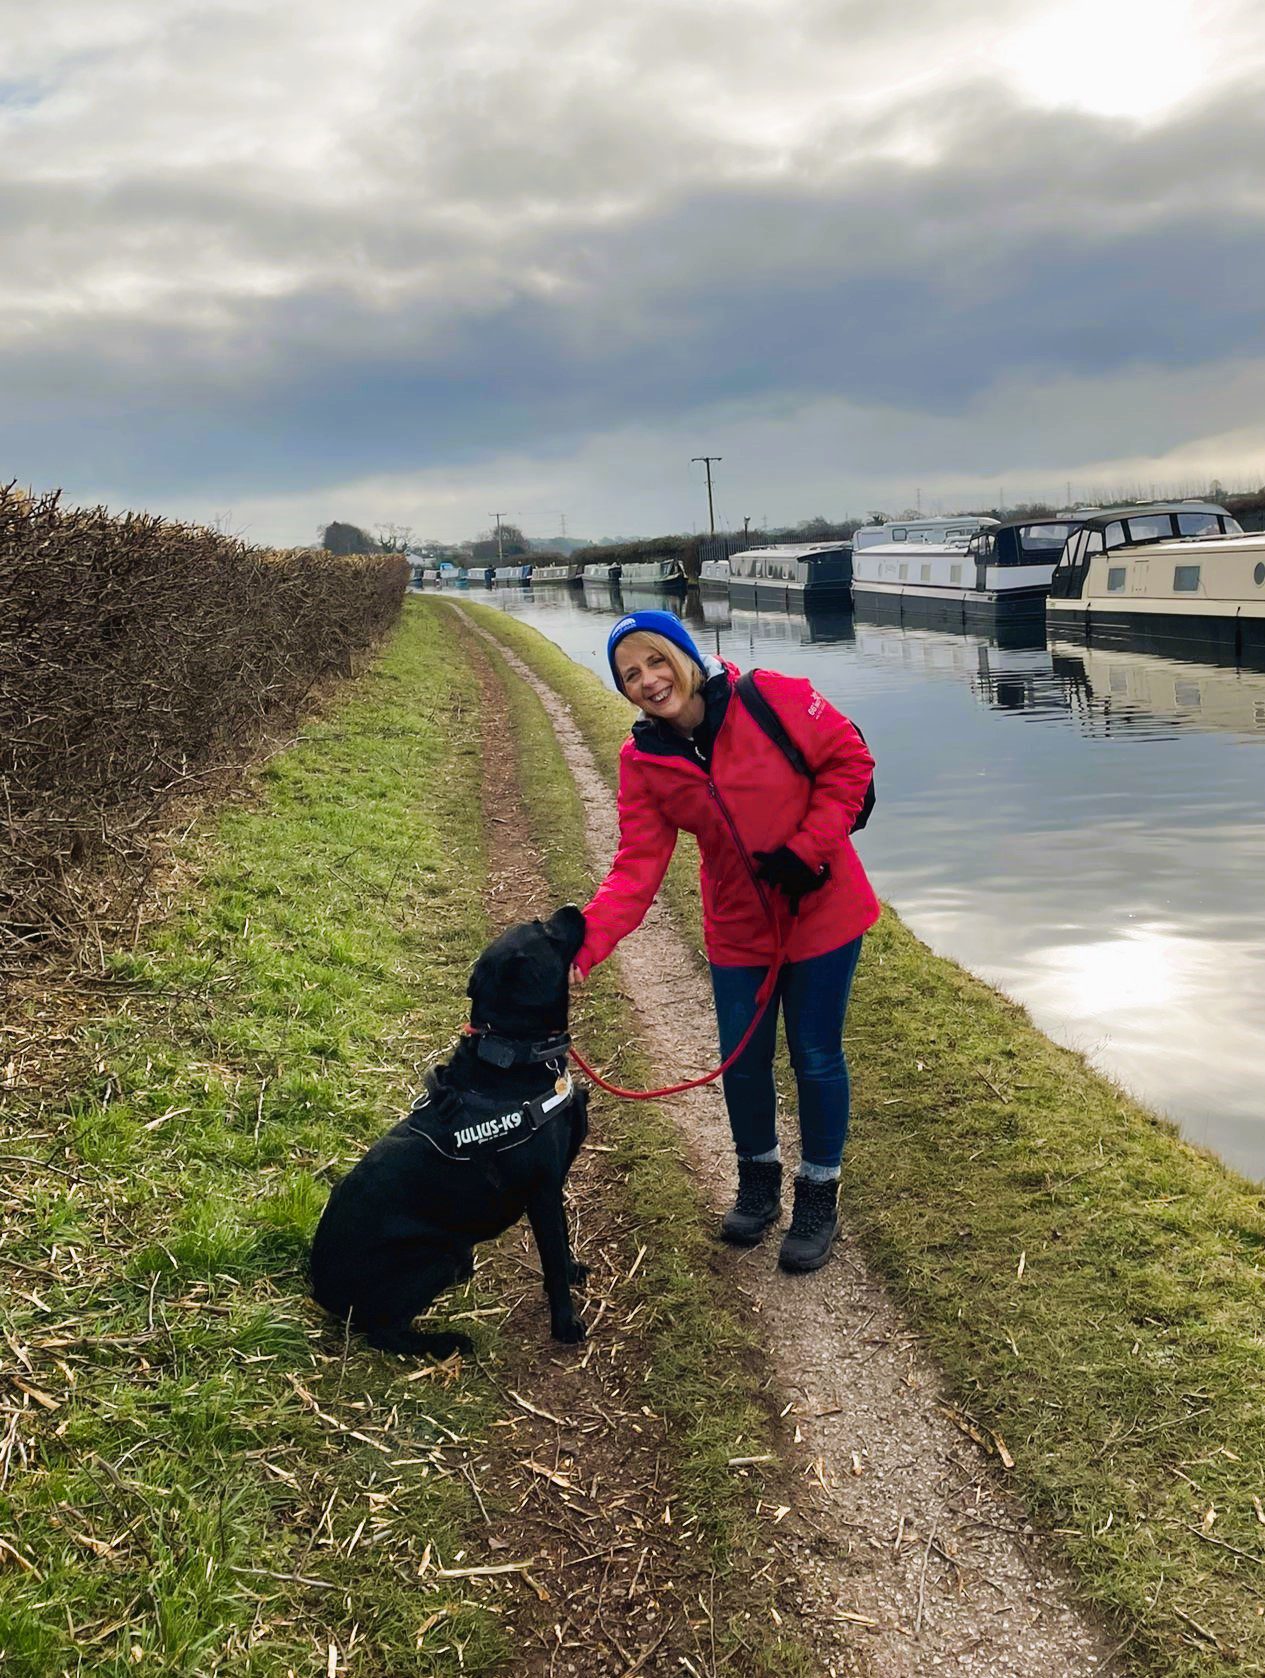 A lady wearing a Francis House beanie poses for a photo with a black Labrador by the side of the canal along the Lymm Loop.